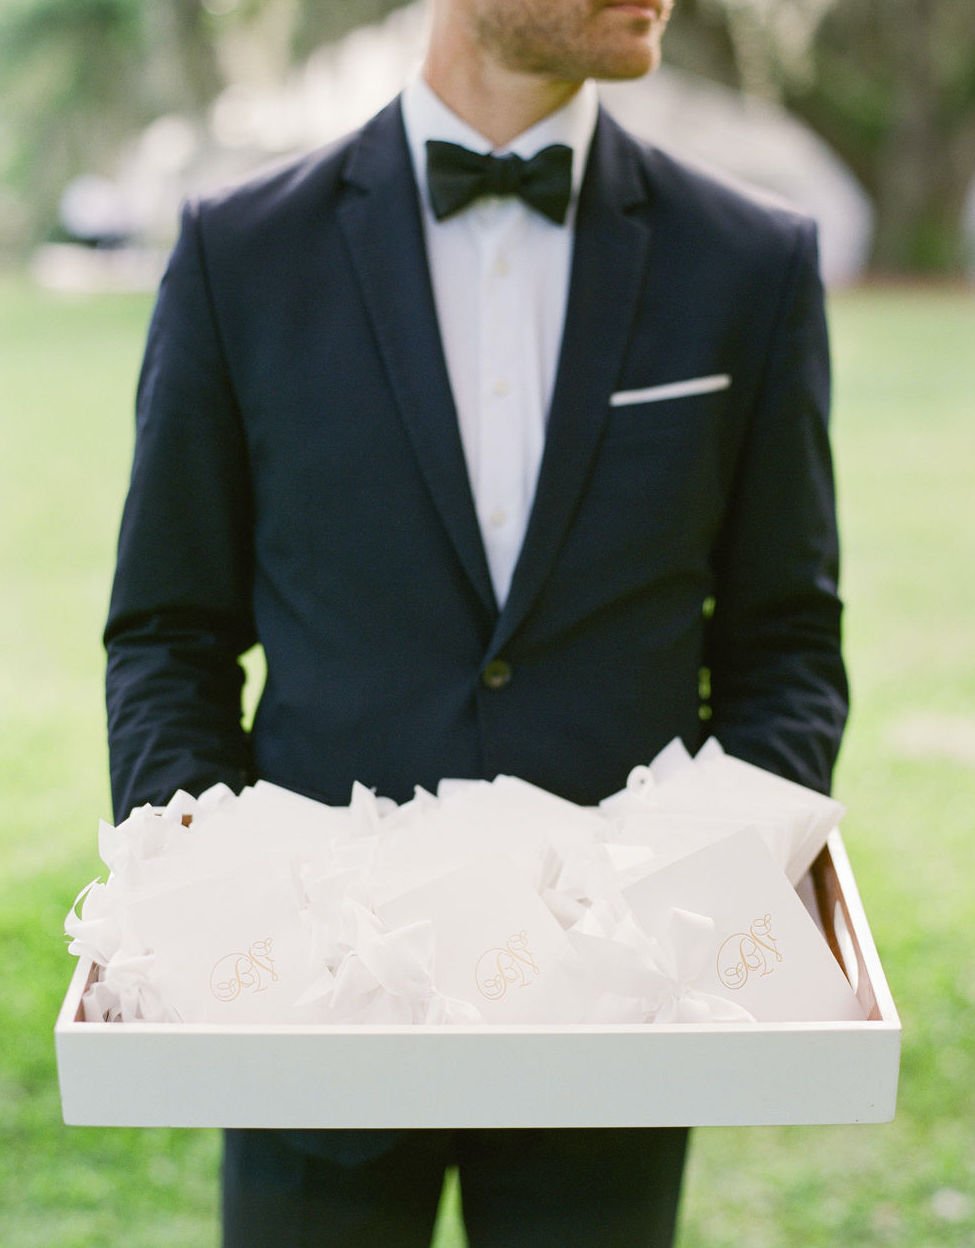 A man is holding a tray of white wedding booklets for guests.